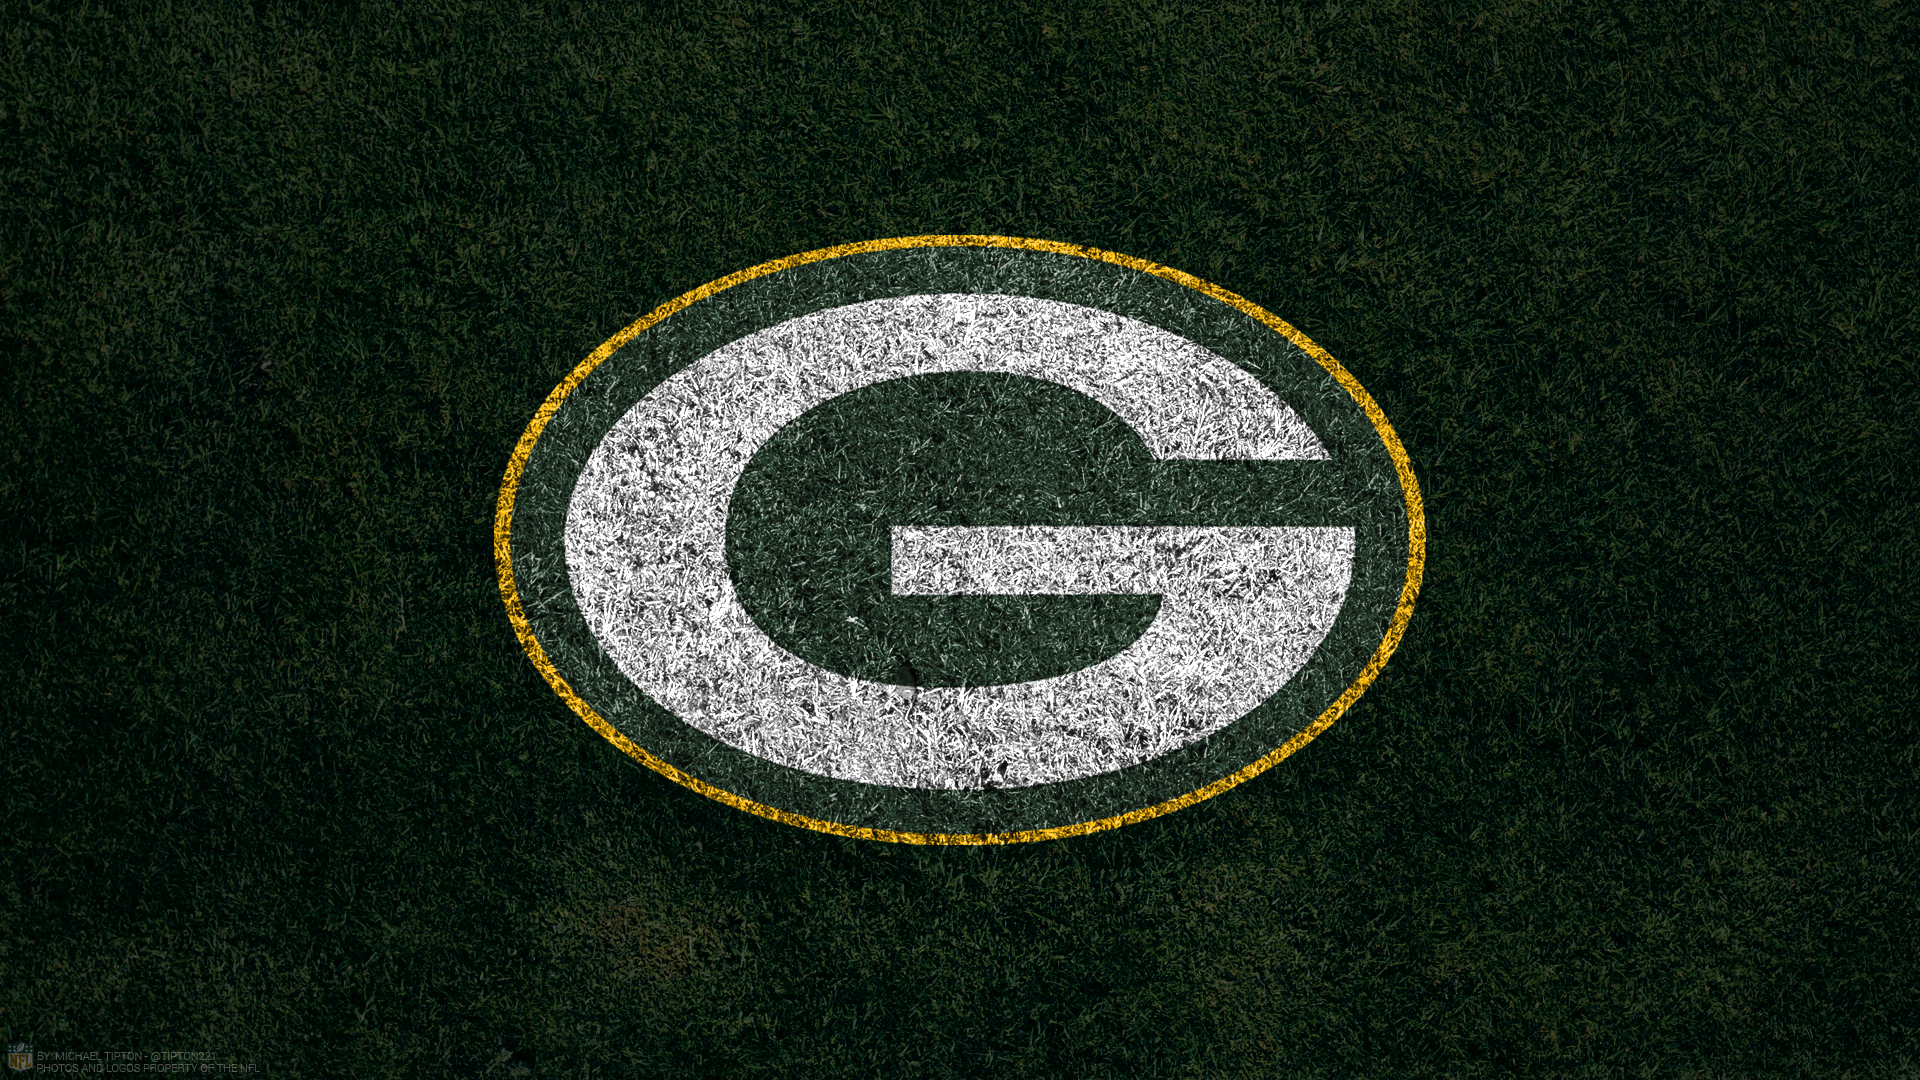 Green Bay Packers Wallpaper. iPhone. Android